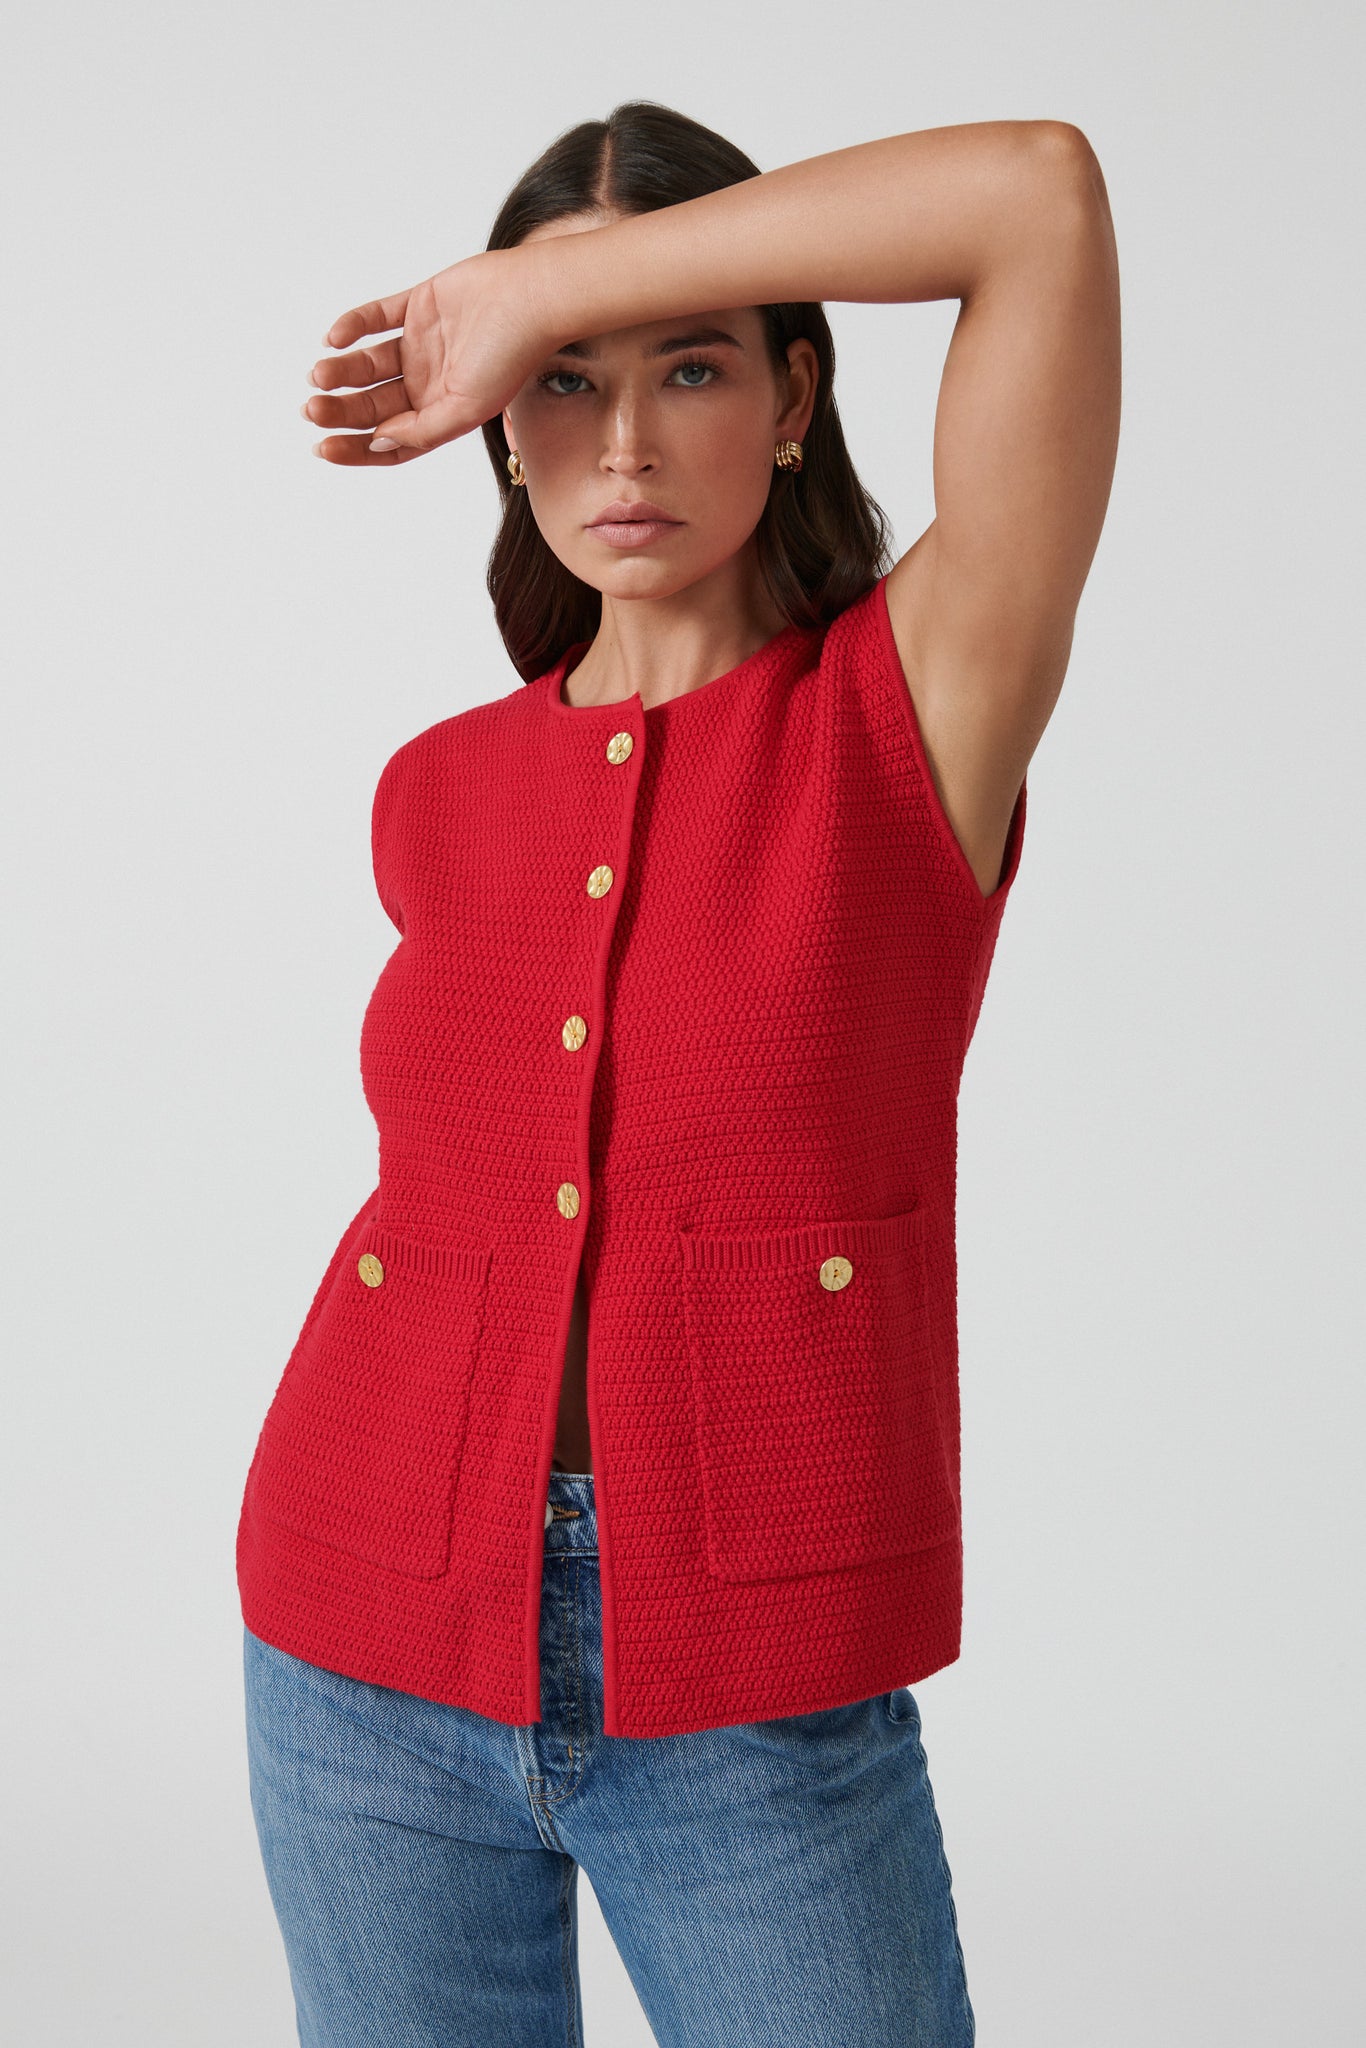 HELENA GILET - RED